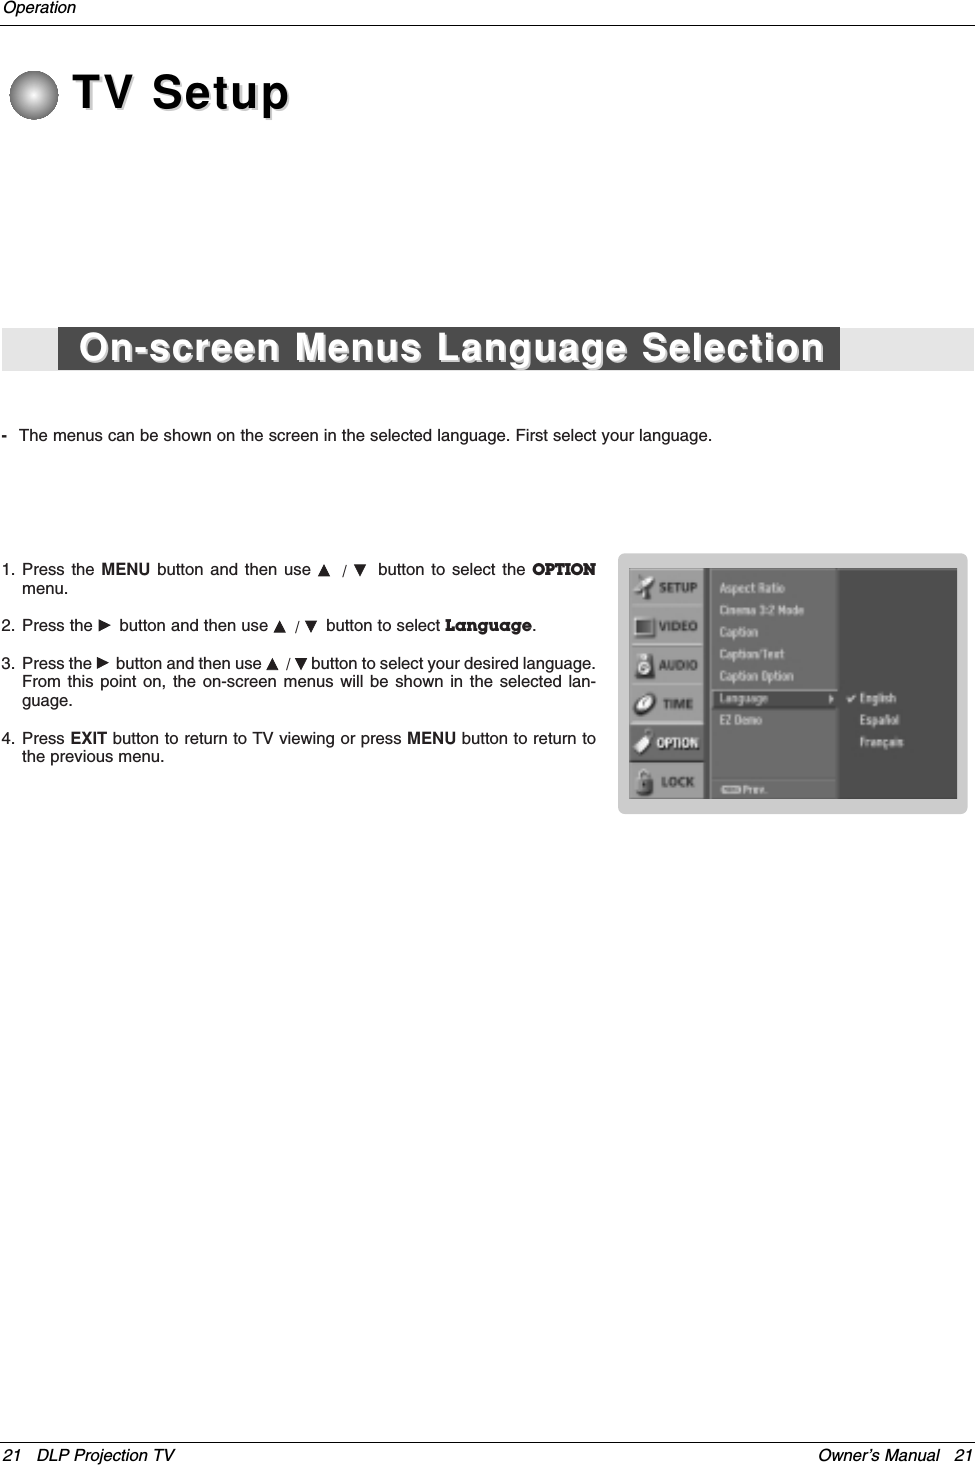 Owner’s Manual   2121 DLP Projection TVOperationTV SetupTV Setup-The menus can be shown on the screen in the selected language. First select your language.1. Press the MENU button and then use D/  Ebutton to select the OPTIONmenu.2. Press the Gbutton and then use D/ Ebutton to select Language. 3. Press the Gbutton and then use D/ Ebutton to select your desired language.From this point on, the on-screen menus will be shown in the selected lan-guage.4. Press EXIT button to return to TV viewing or press MENU button to return tothe previous menu.On-screen Menus Language SelectionOn-screen Menus Language Selection